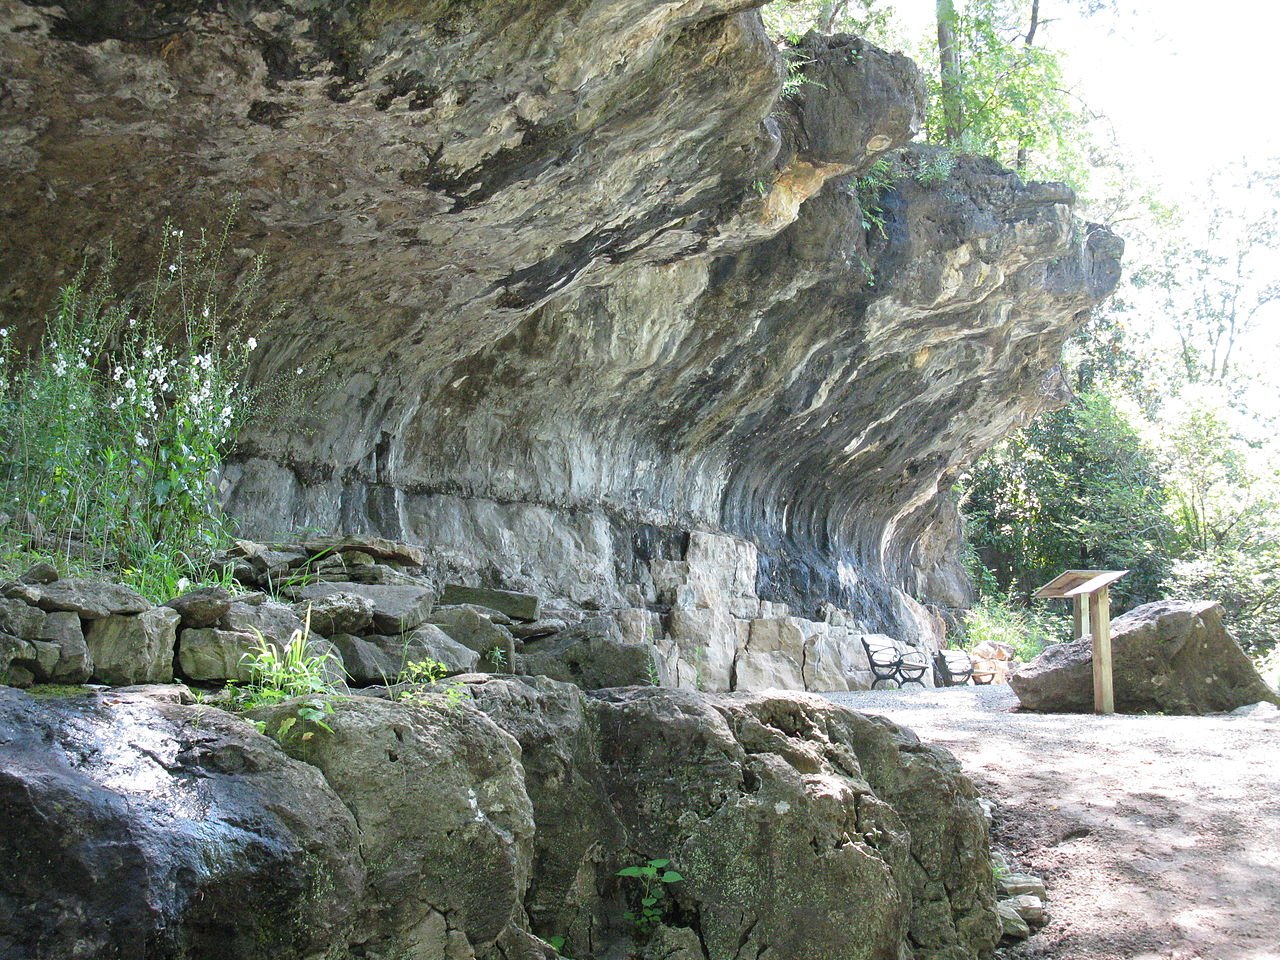 The rock shelter is a significant historical site.